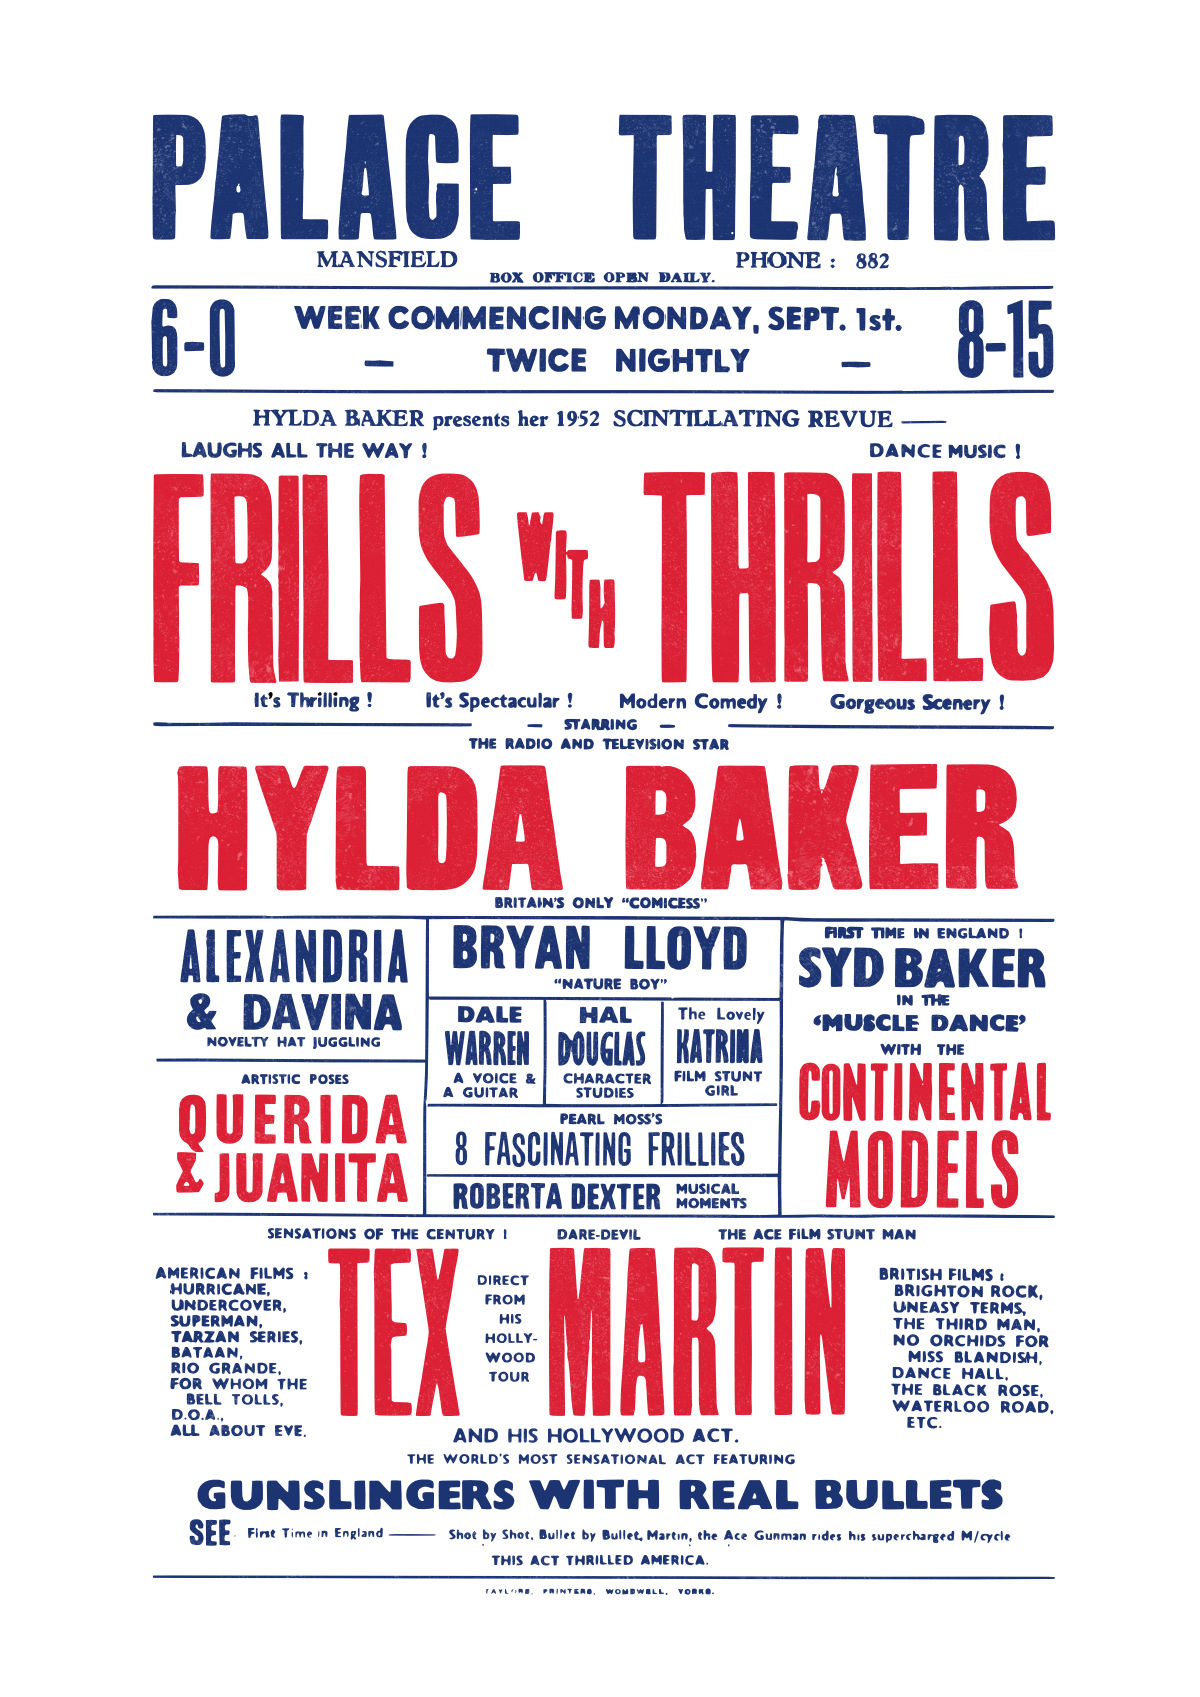 Frills with Thrills poster artwork